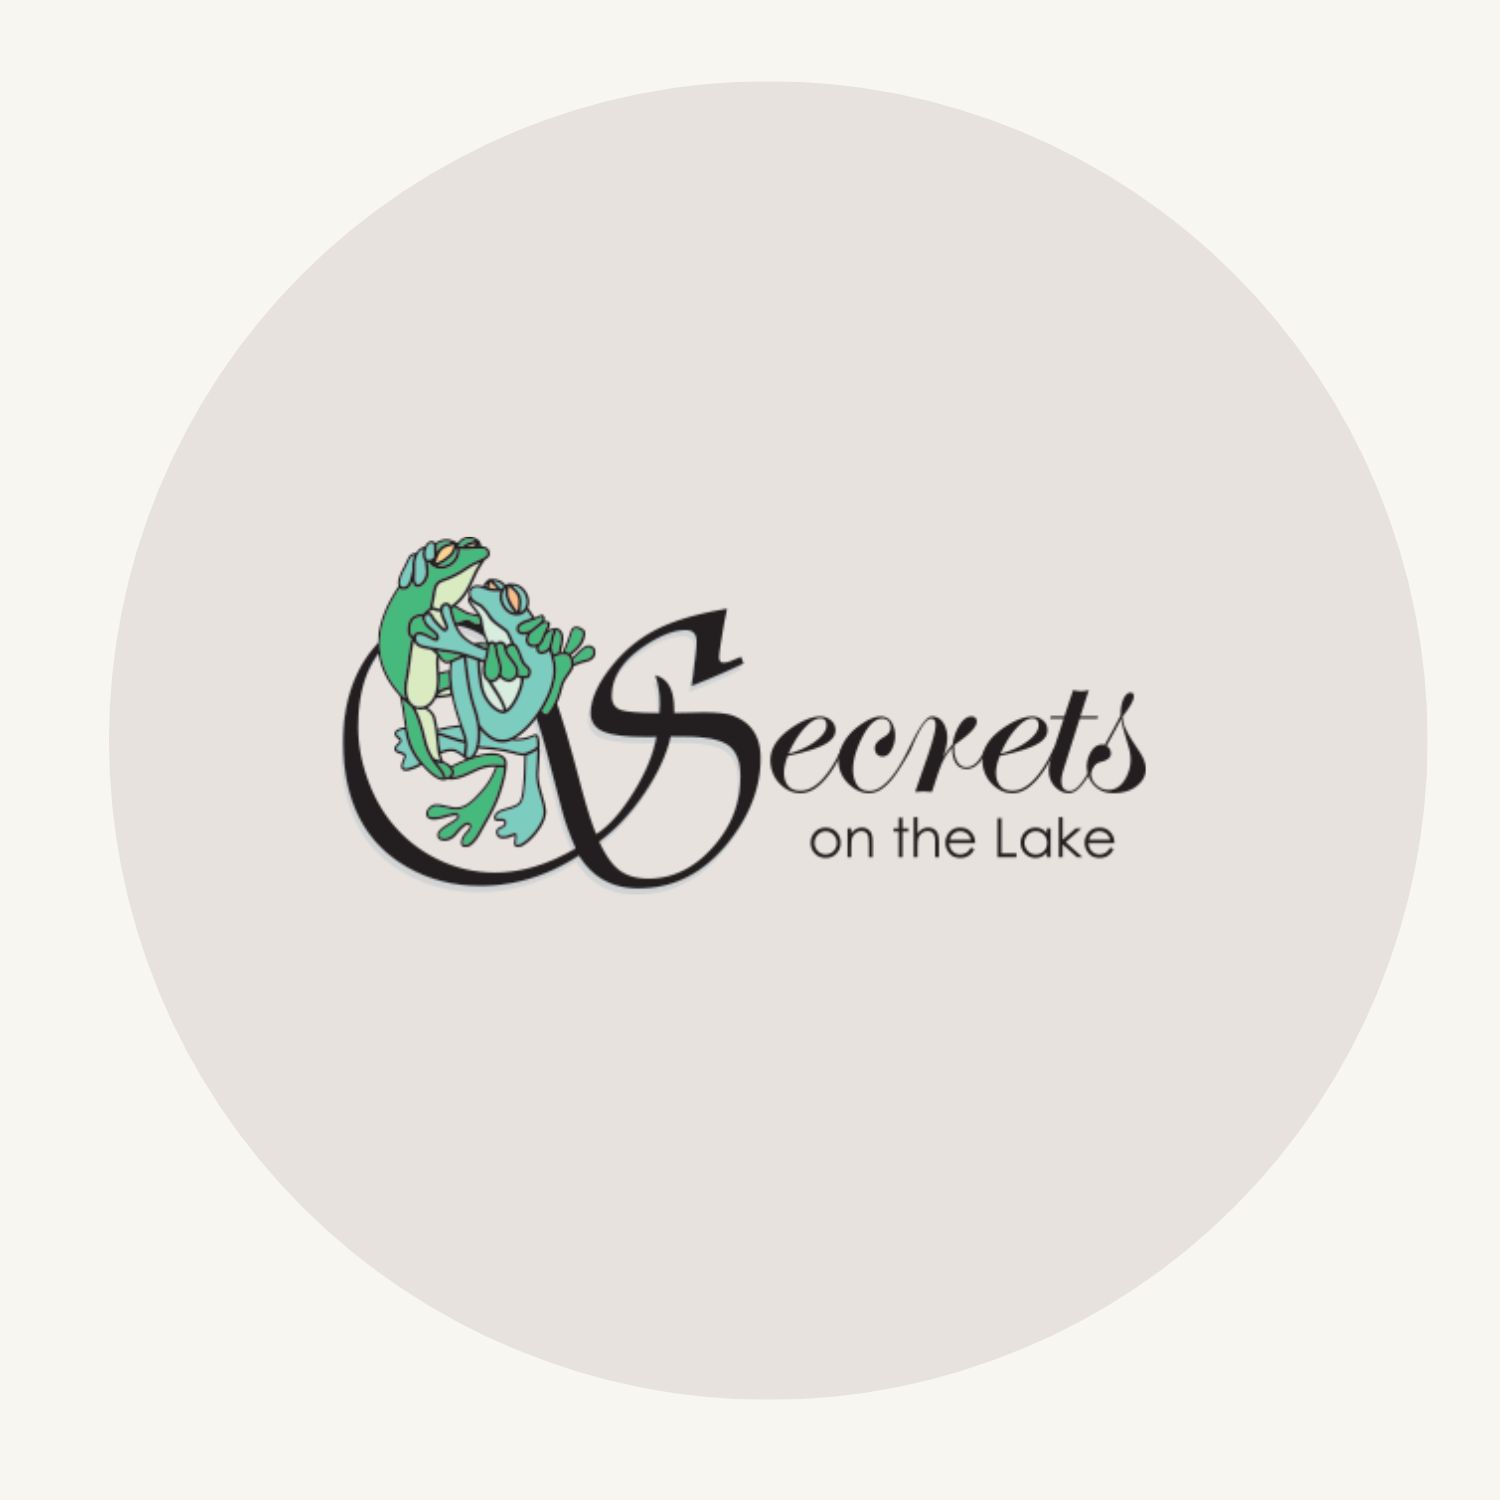 pink circle logo for Secrets with green detail a wedding venue that Driftwood Blue, wedding stylist, uses